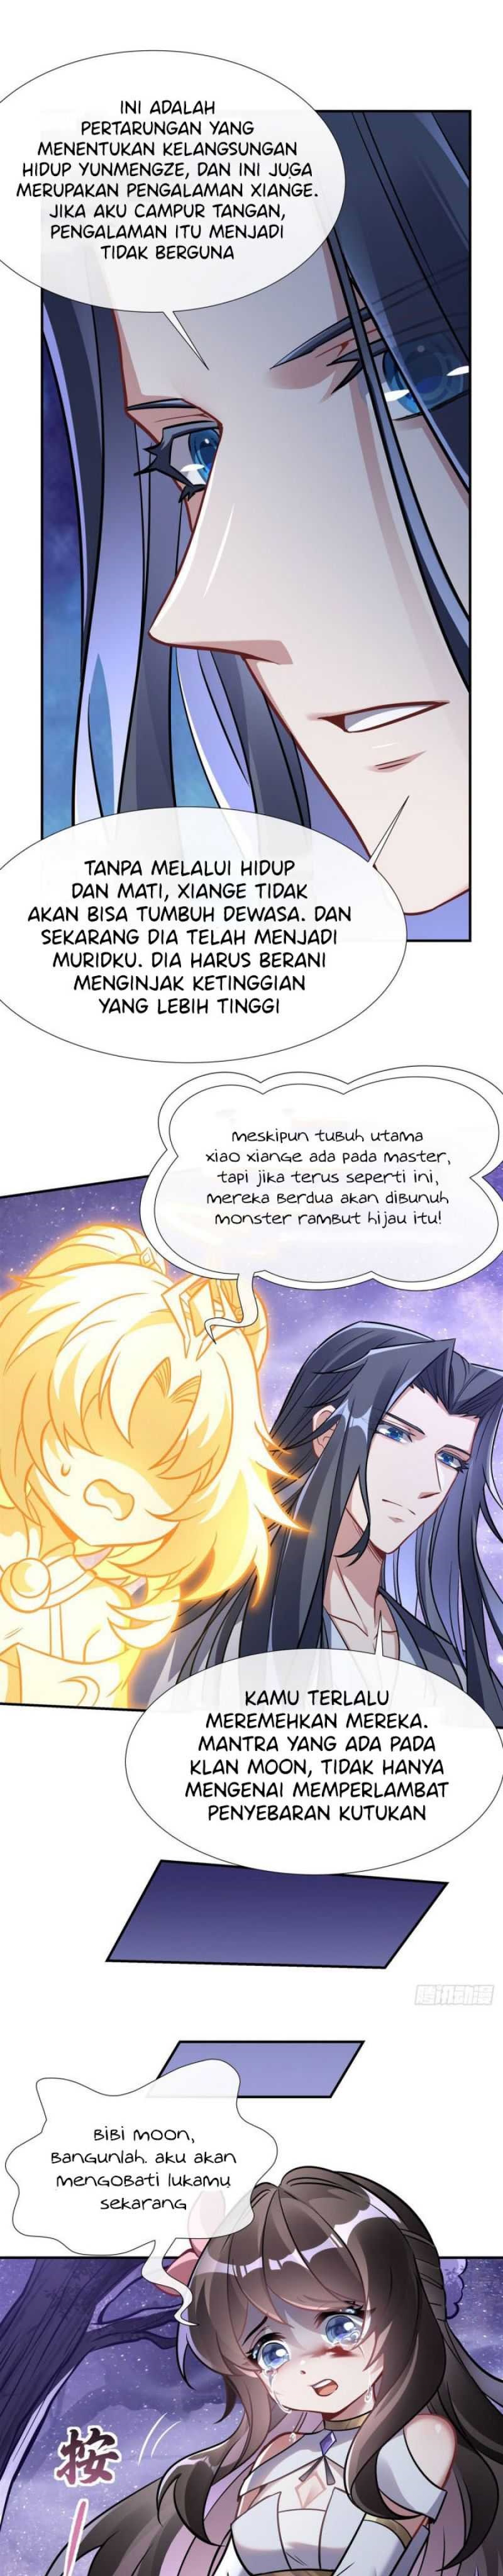 Dilarang COPAS - situs resmi www.mangacanblog.com - Komik my female apprentices are all big shots from the future 111 - chapter 111 112 Indonesia my female apprentices are all big shots from the future 111 - chapter 111 Terbaru 13|Baca Manga Komik Indonesia|Mangacan